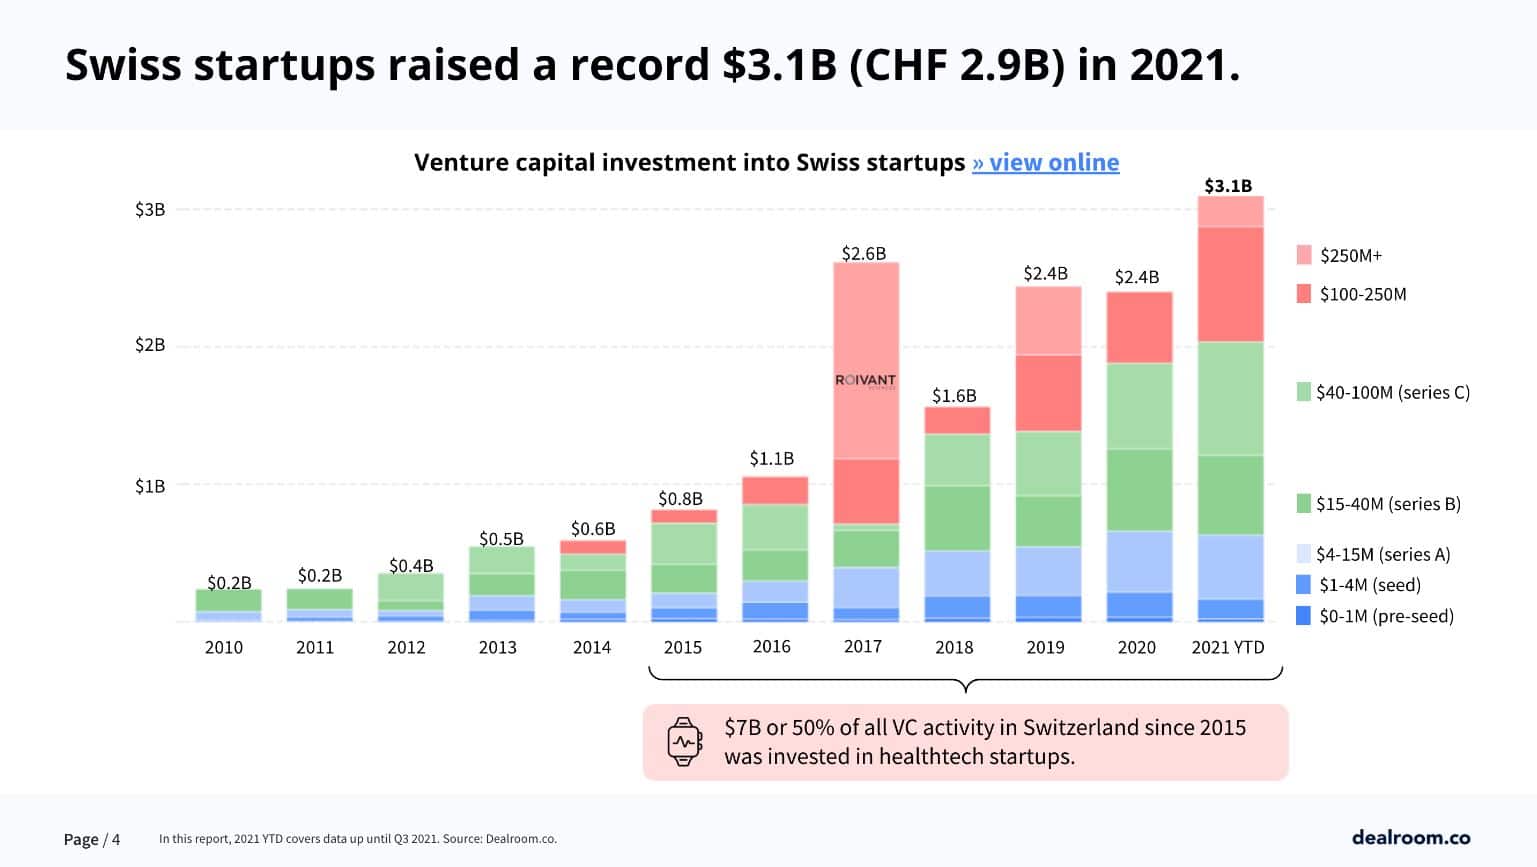 Graph about Swiss startups raised a record $3.1B in 2021